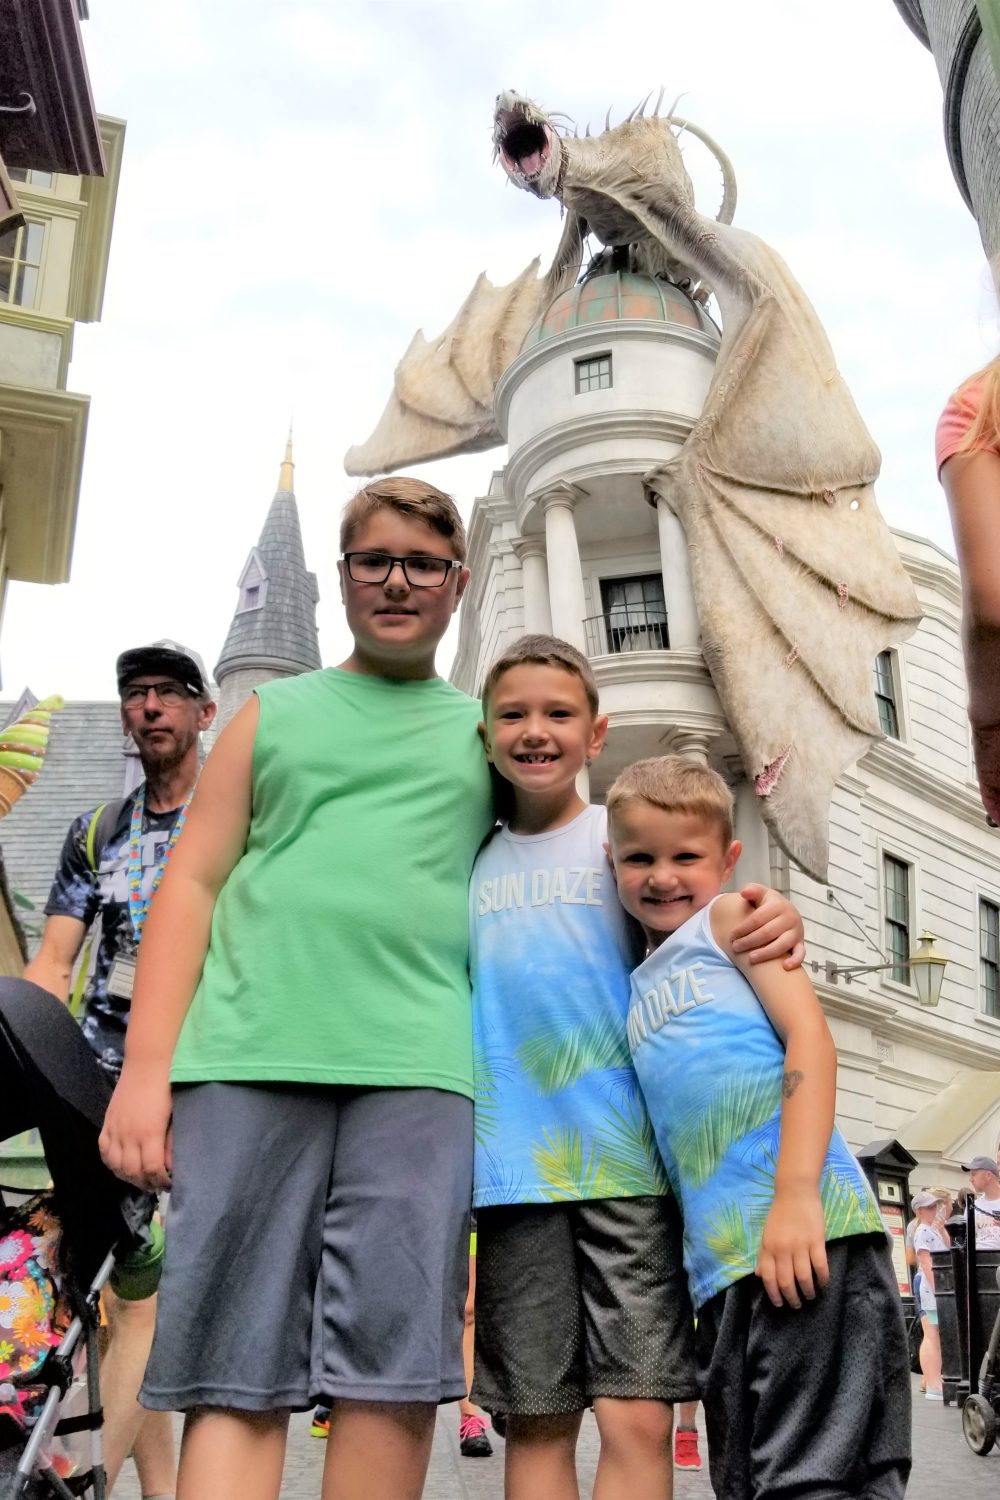 Three kids posing in front of the dragon In Diagon Alley at Universal Studios Orlando